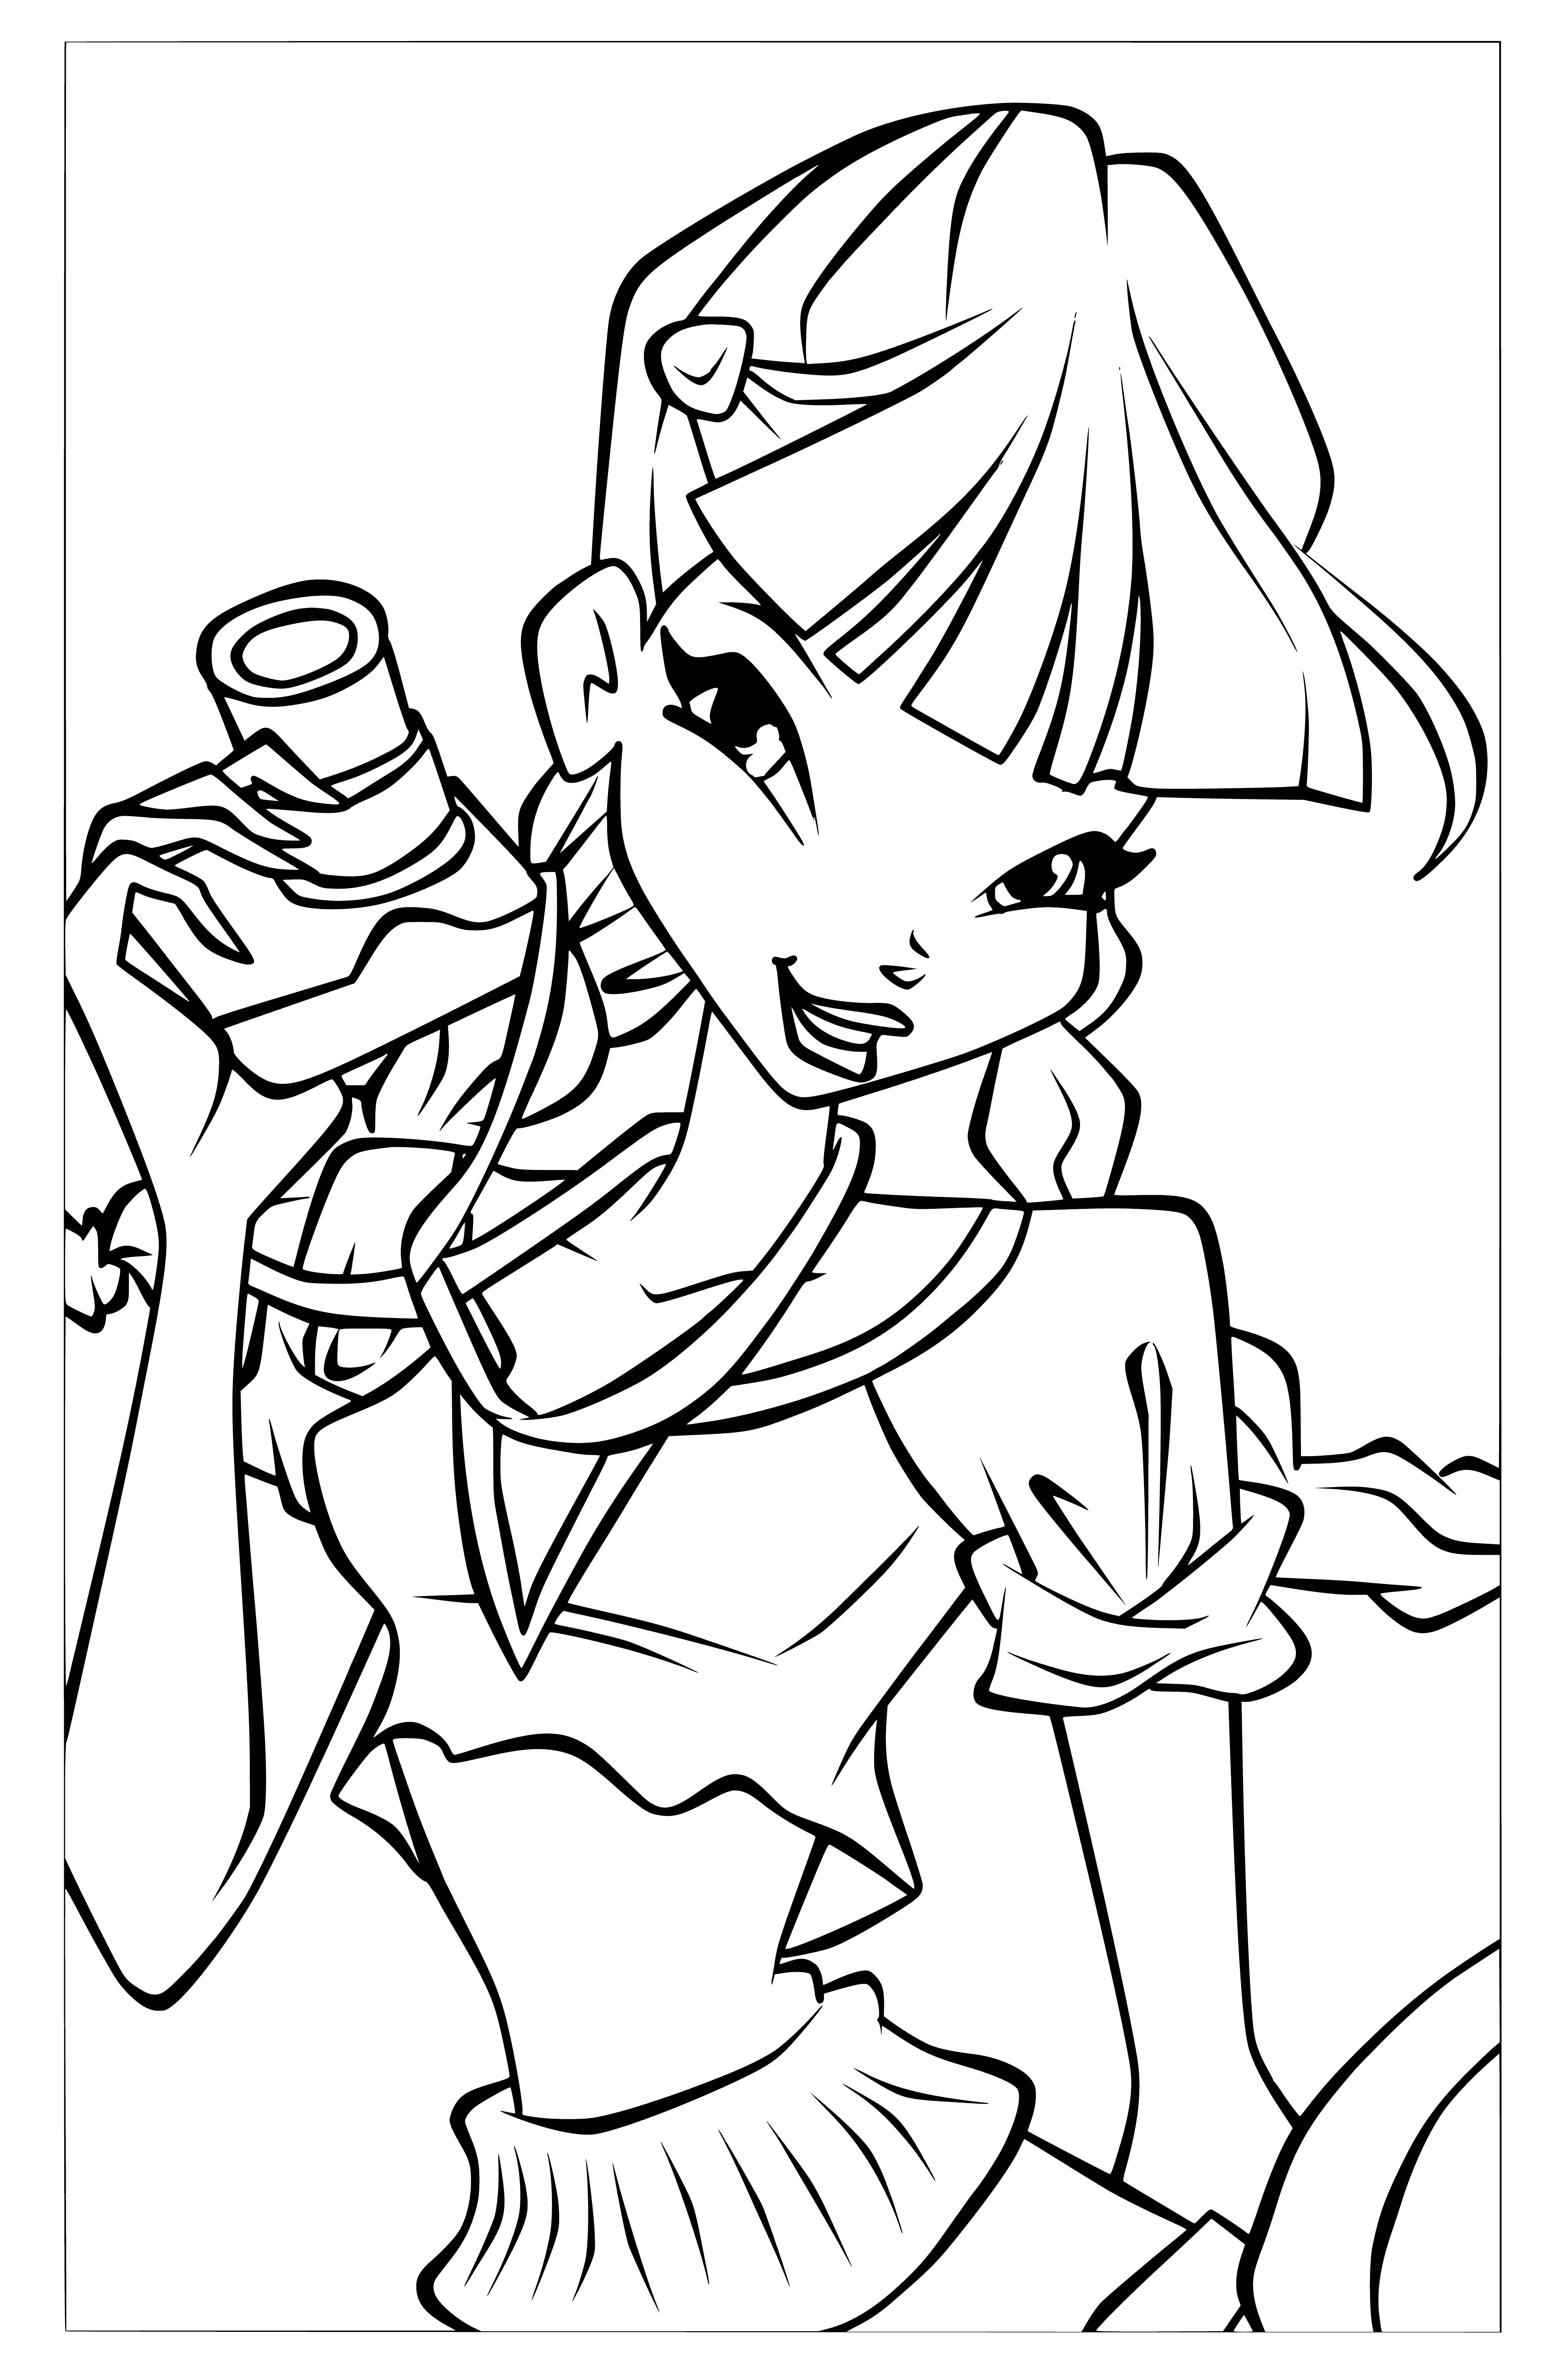 coloring page: Someone taking a coloring page coloring page, cloaked in black & hidden behind long hair.